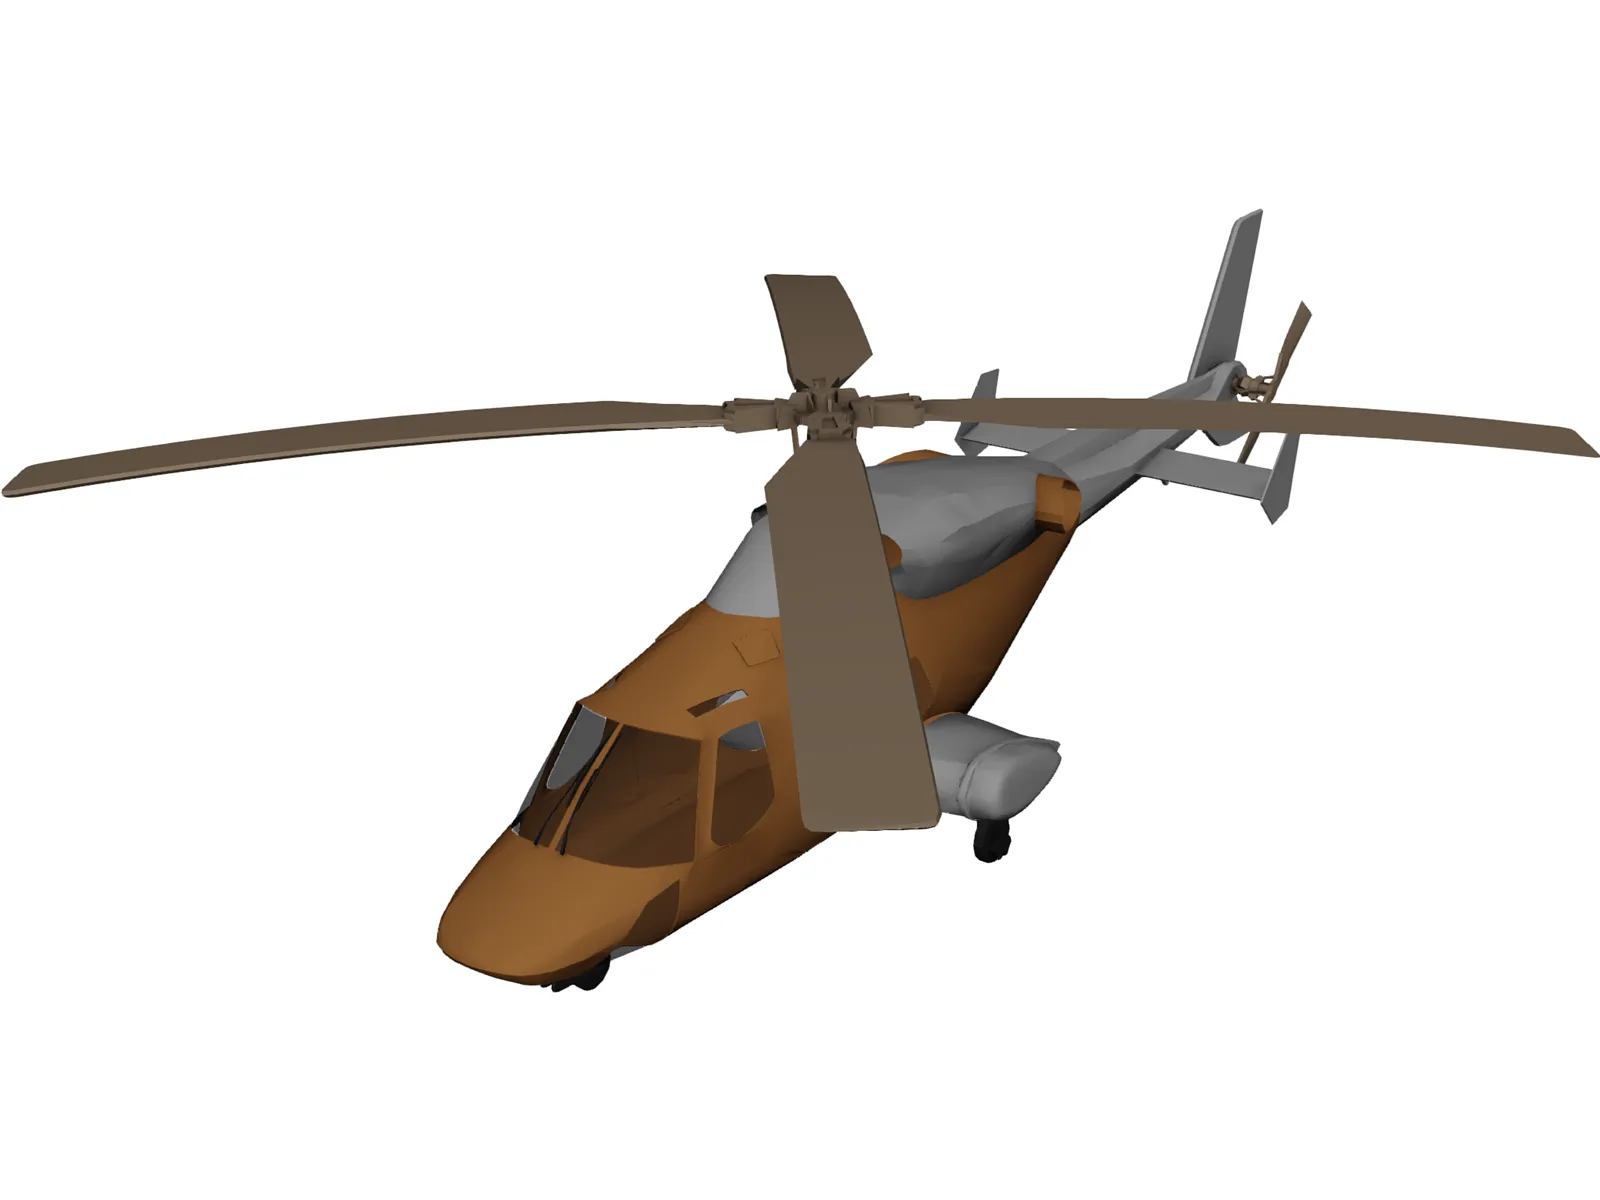 Bell 2201 Helicopter 3D Model